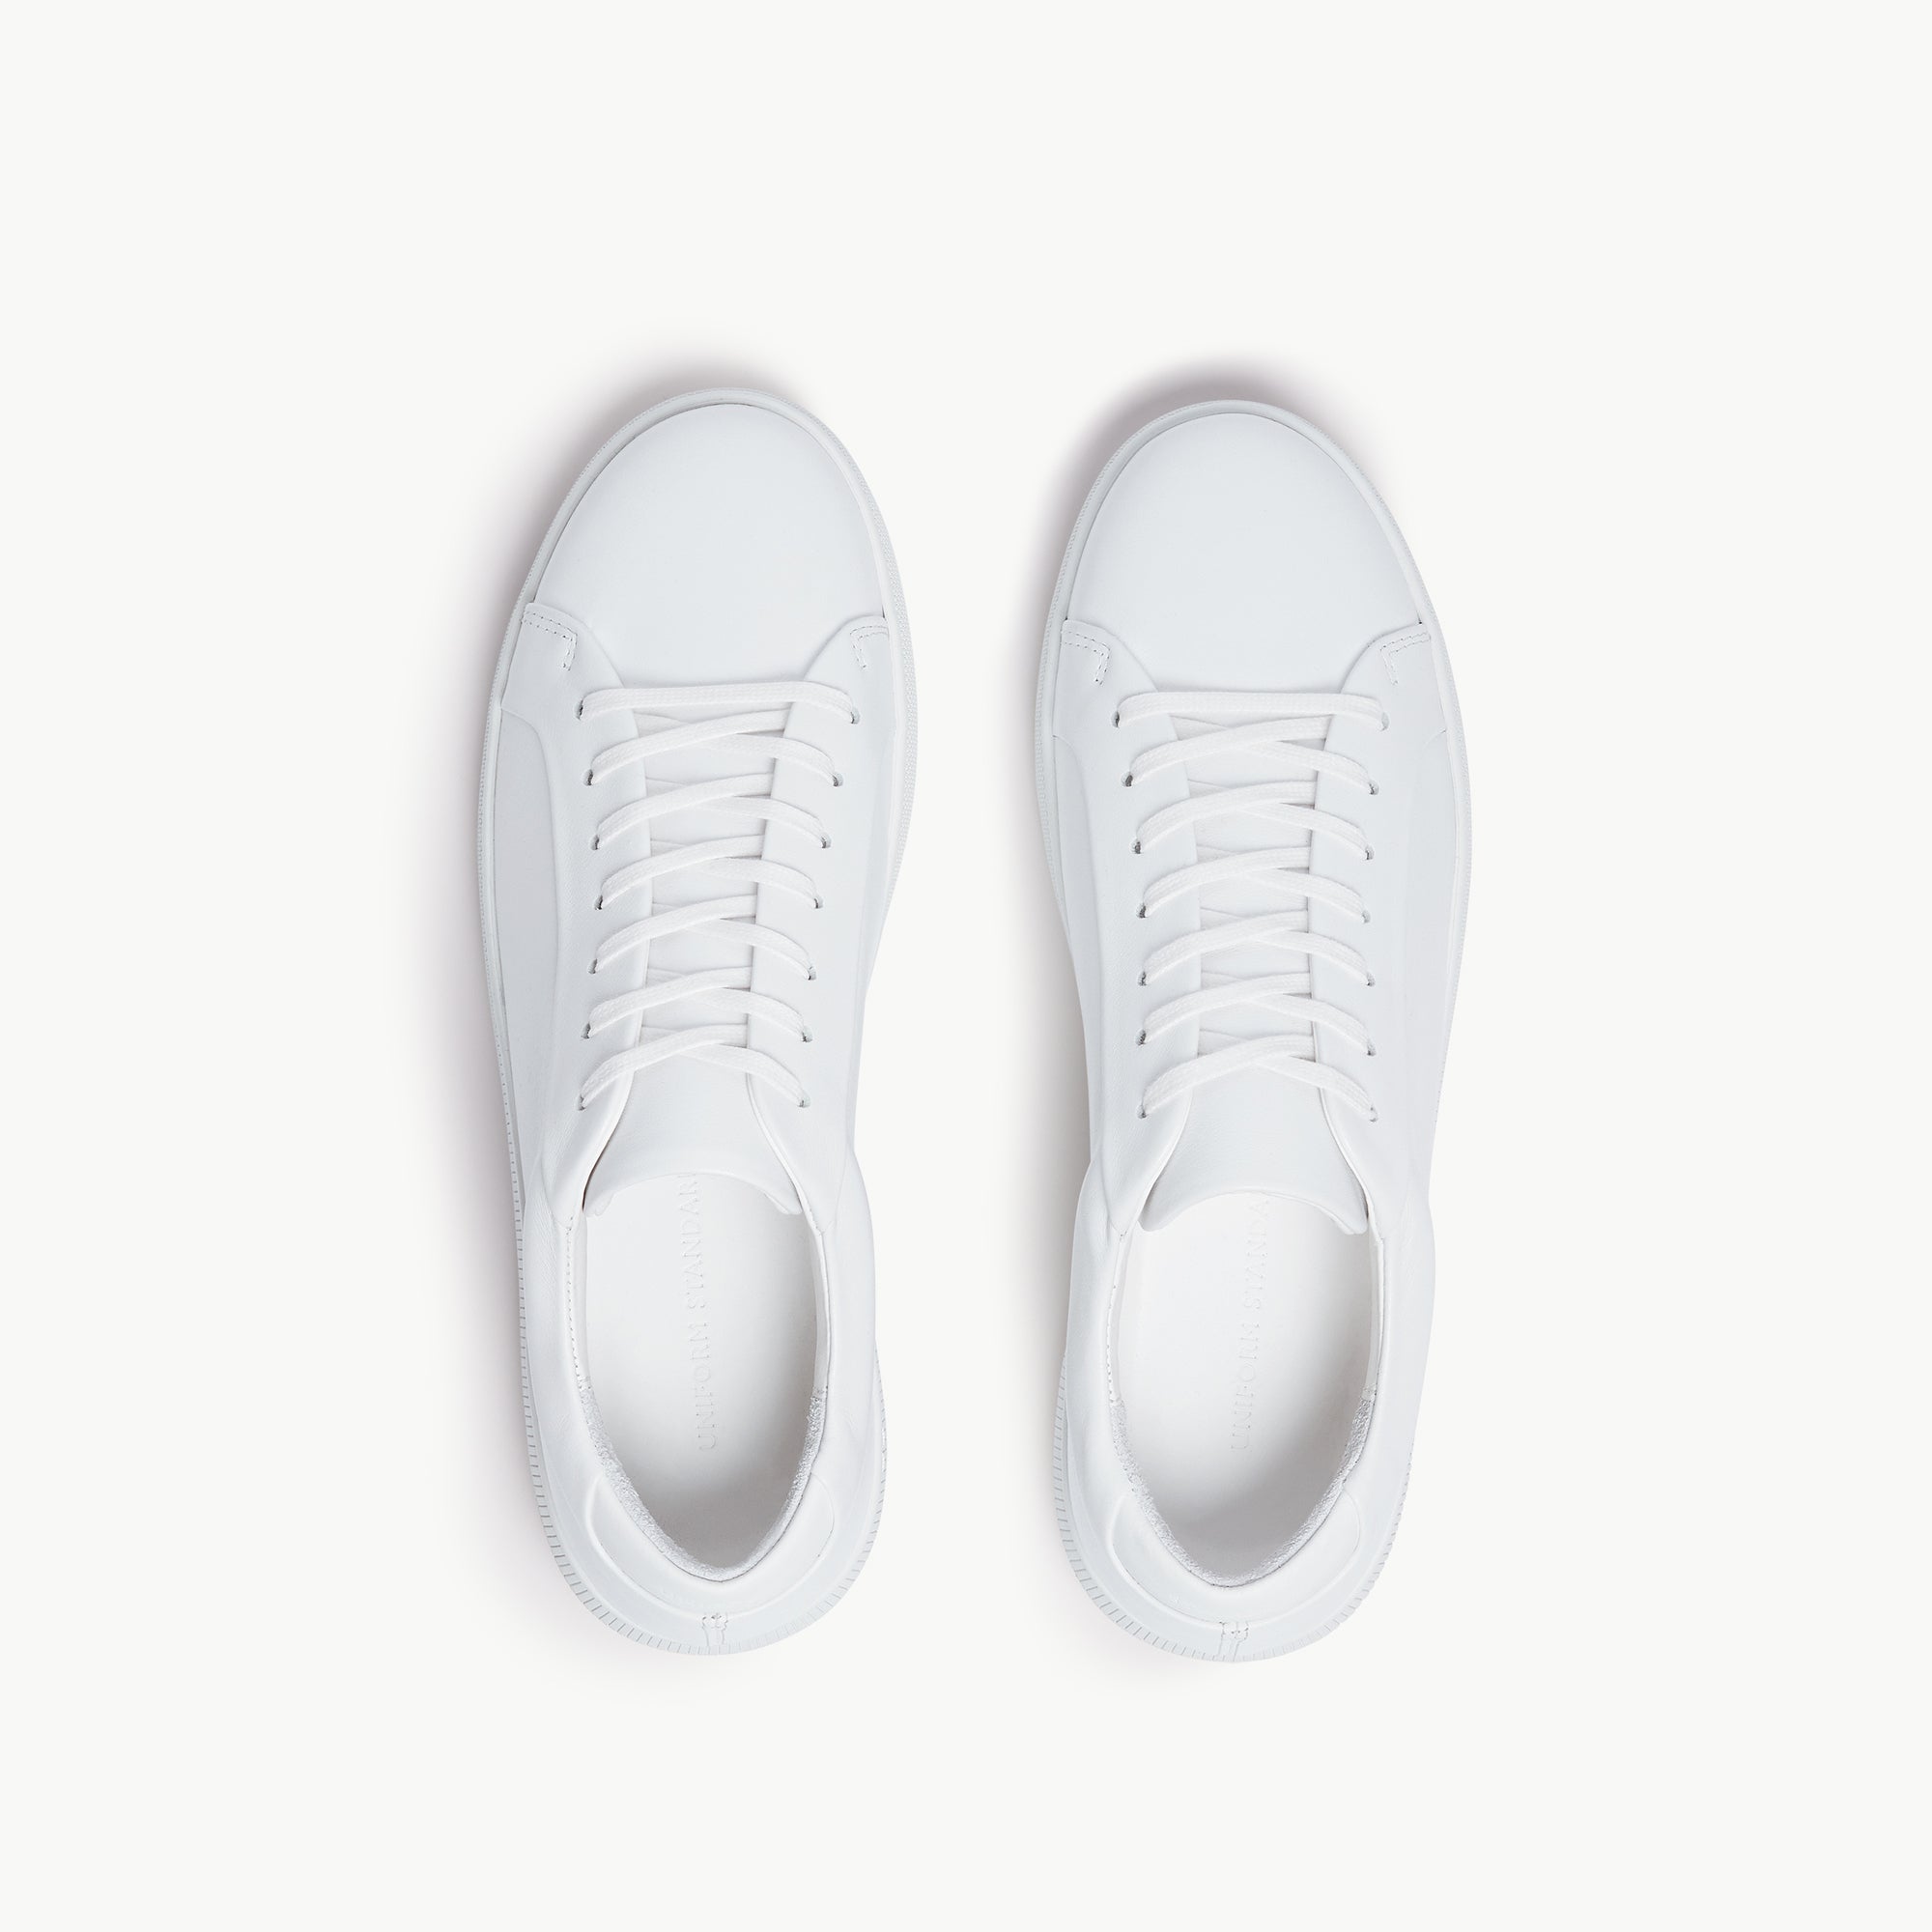 Series 8 Triple White Leather Womens